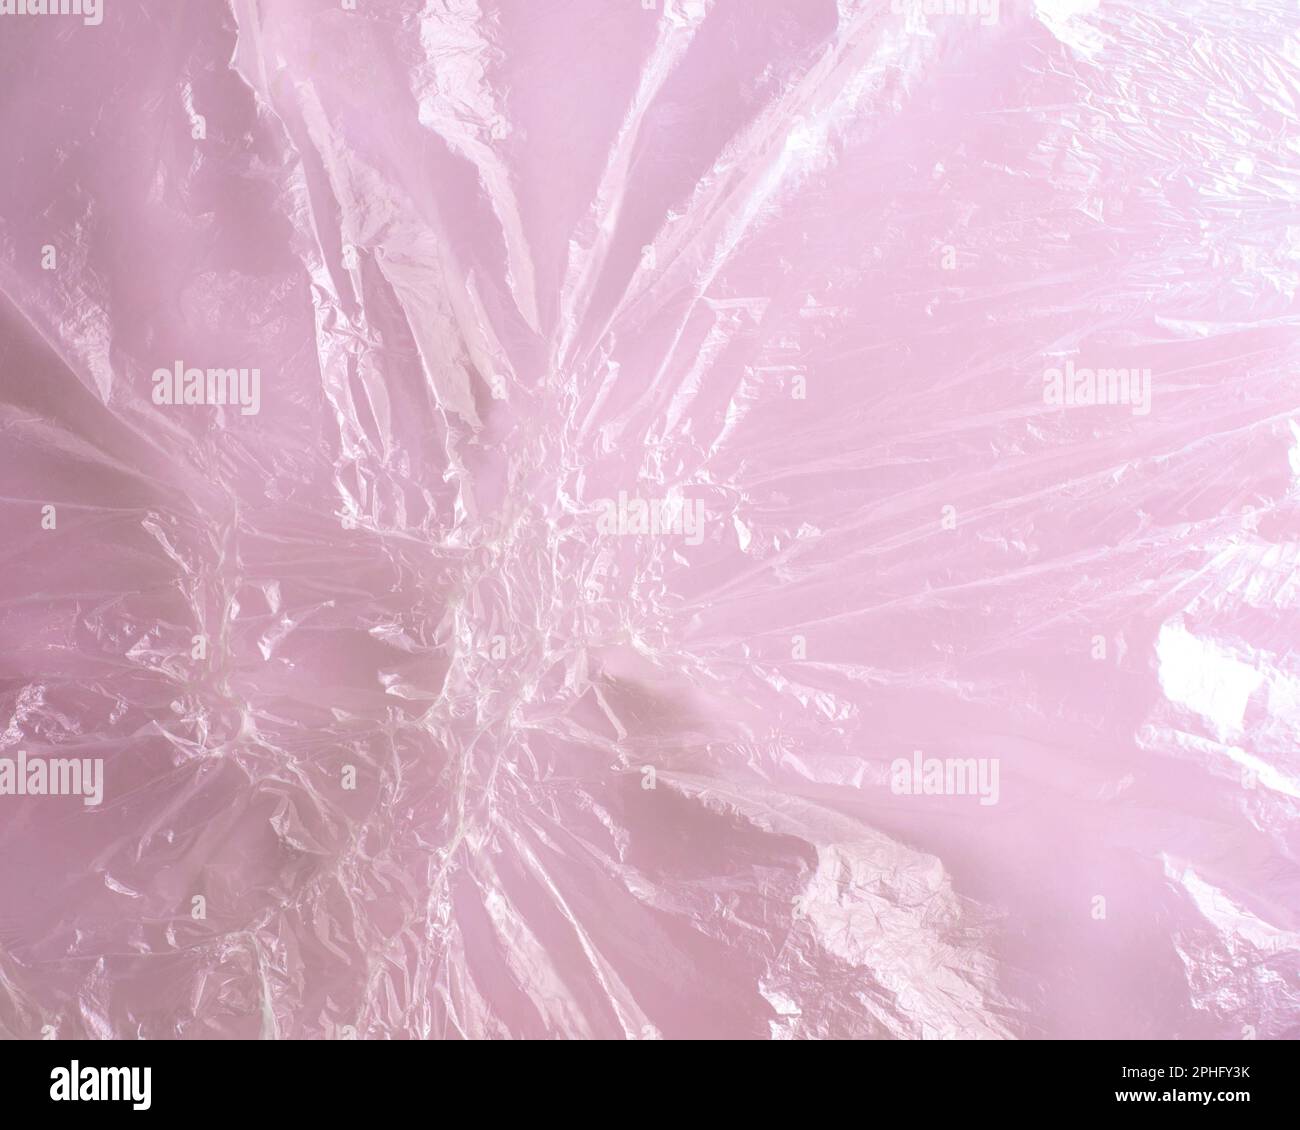 Close-up image of transparent melted plastic cellophane film on pink background. Abstract pattern of fused textured polyethylene. Horizontal format. Stock Photo